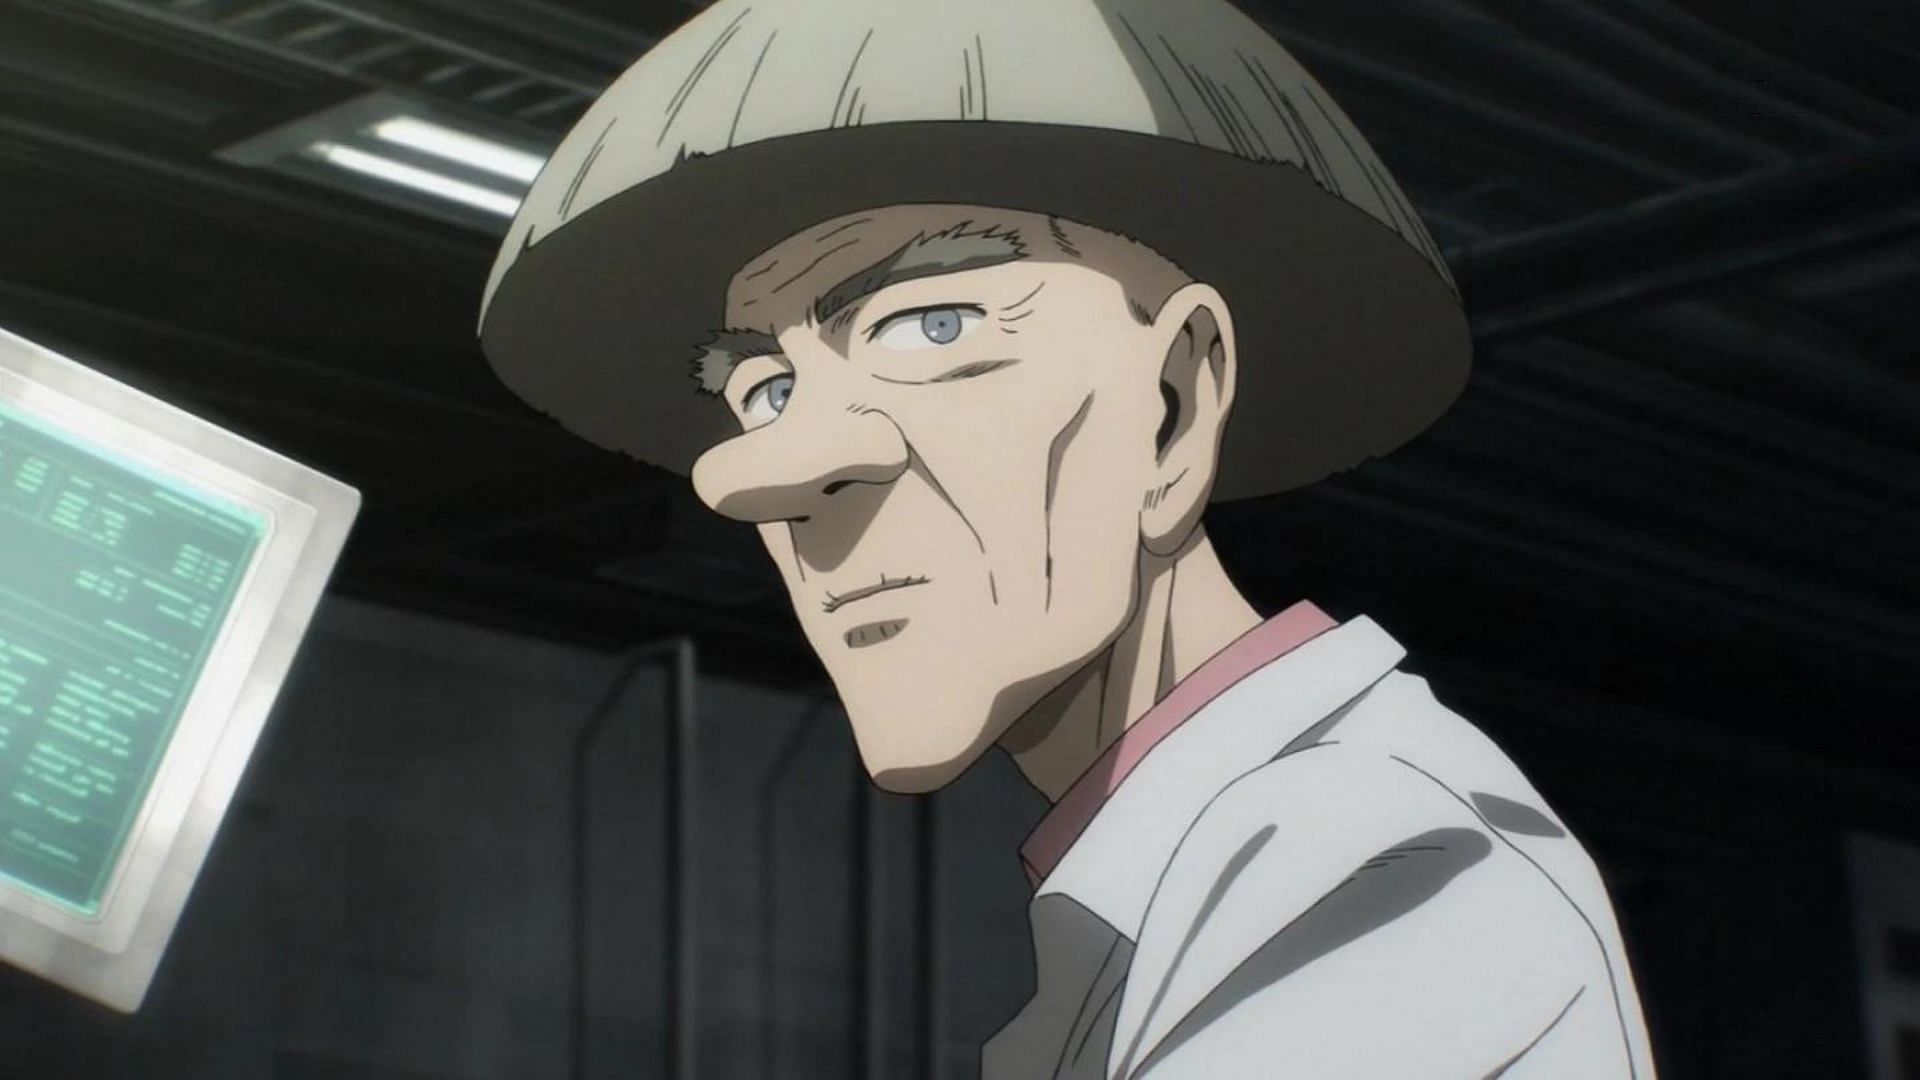 Dr. Kuseno as seen in One Punch Man (Image via Madhouse)